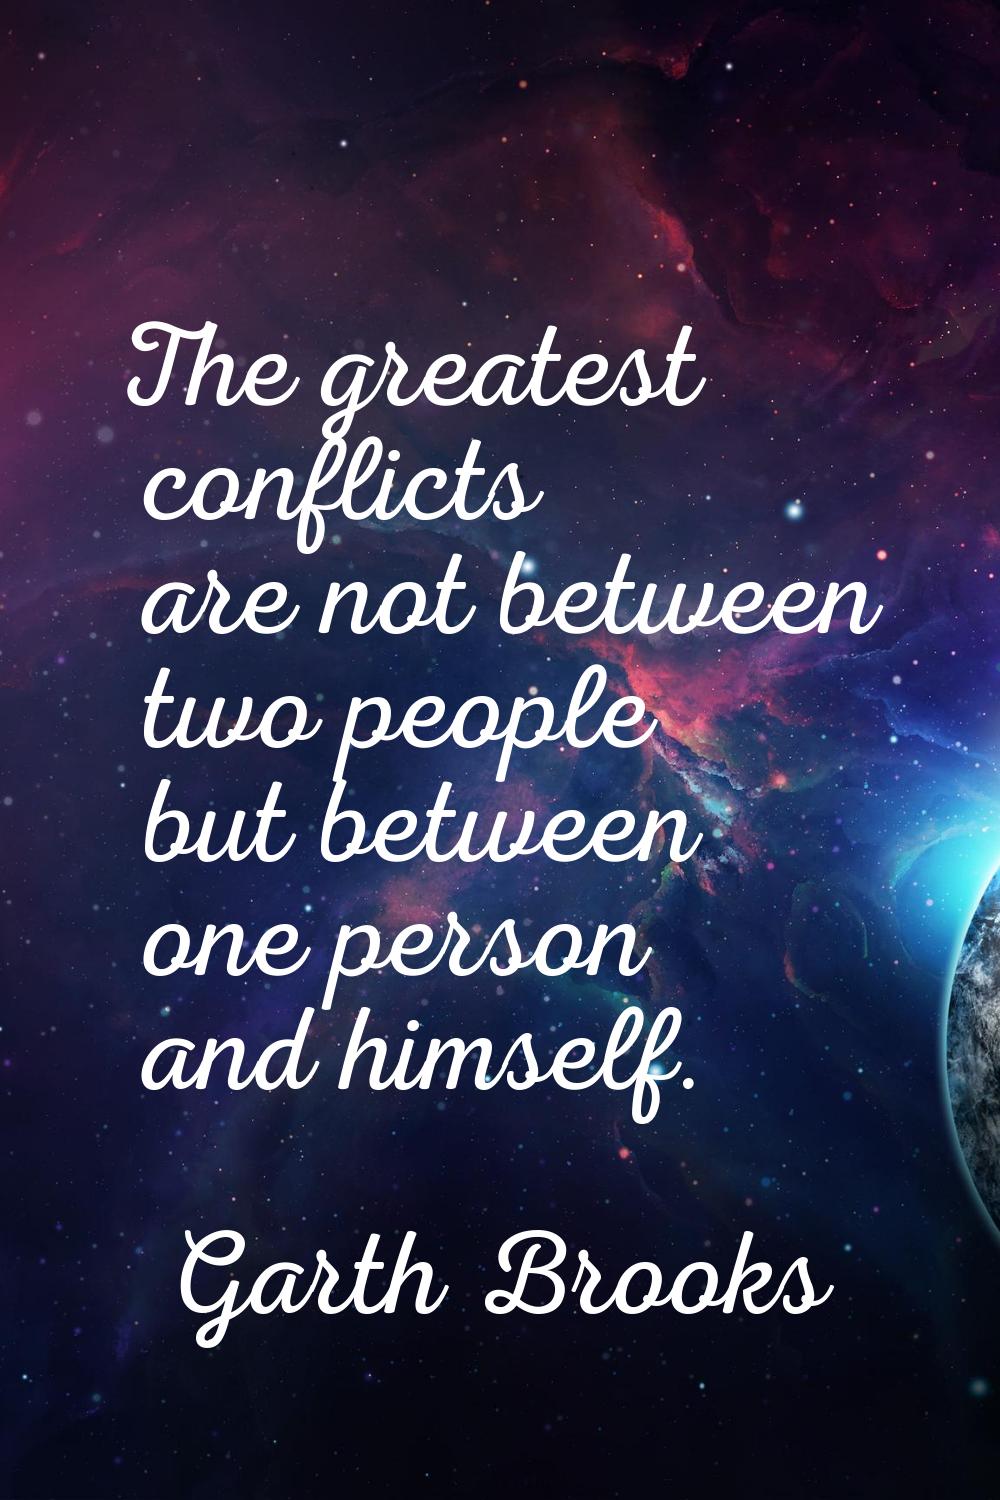 The greatest conflicts are not between two people but between one person and himself.